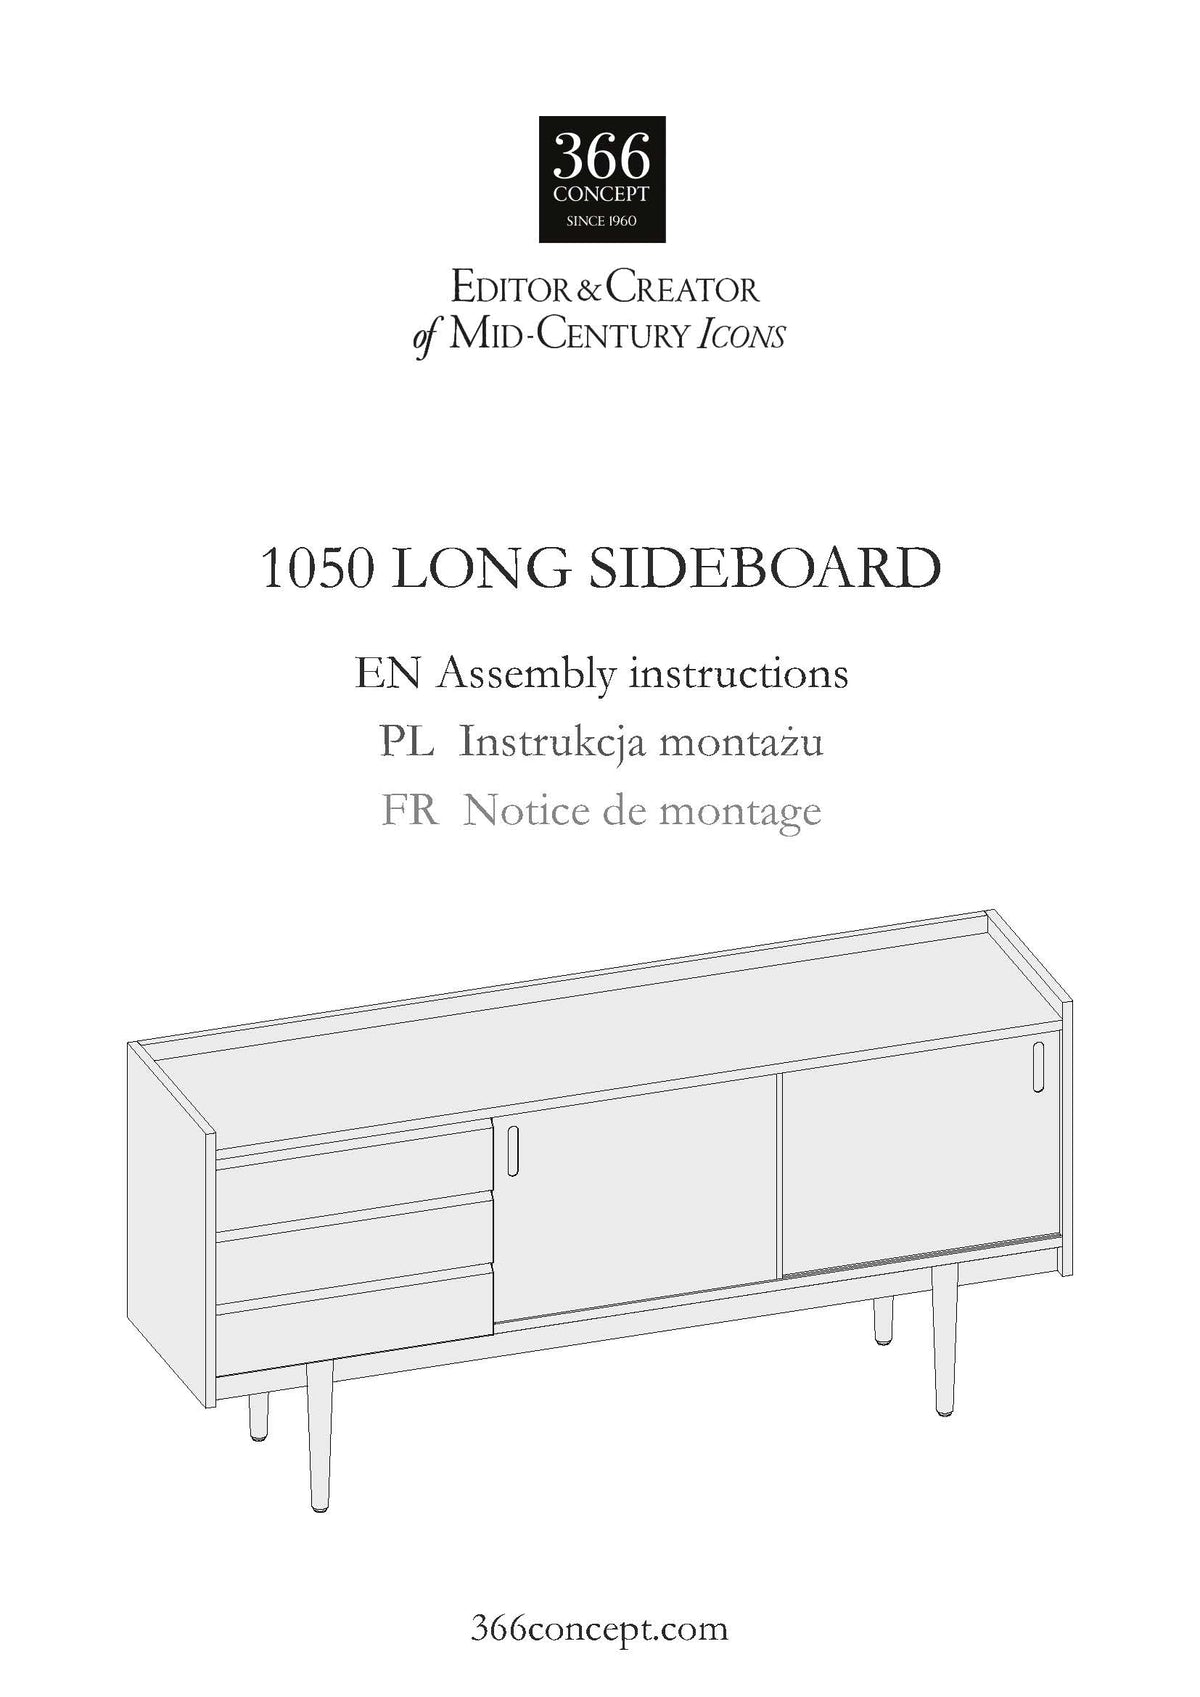 366Concept_long_sideboard_assembly_instructions (2)_Page_01.jpg__PID:a187e94b-0253-4d8a-a271-f736d1f93146